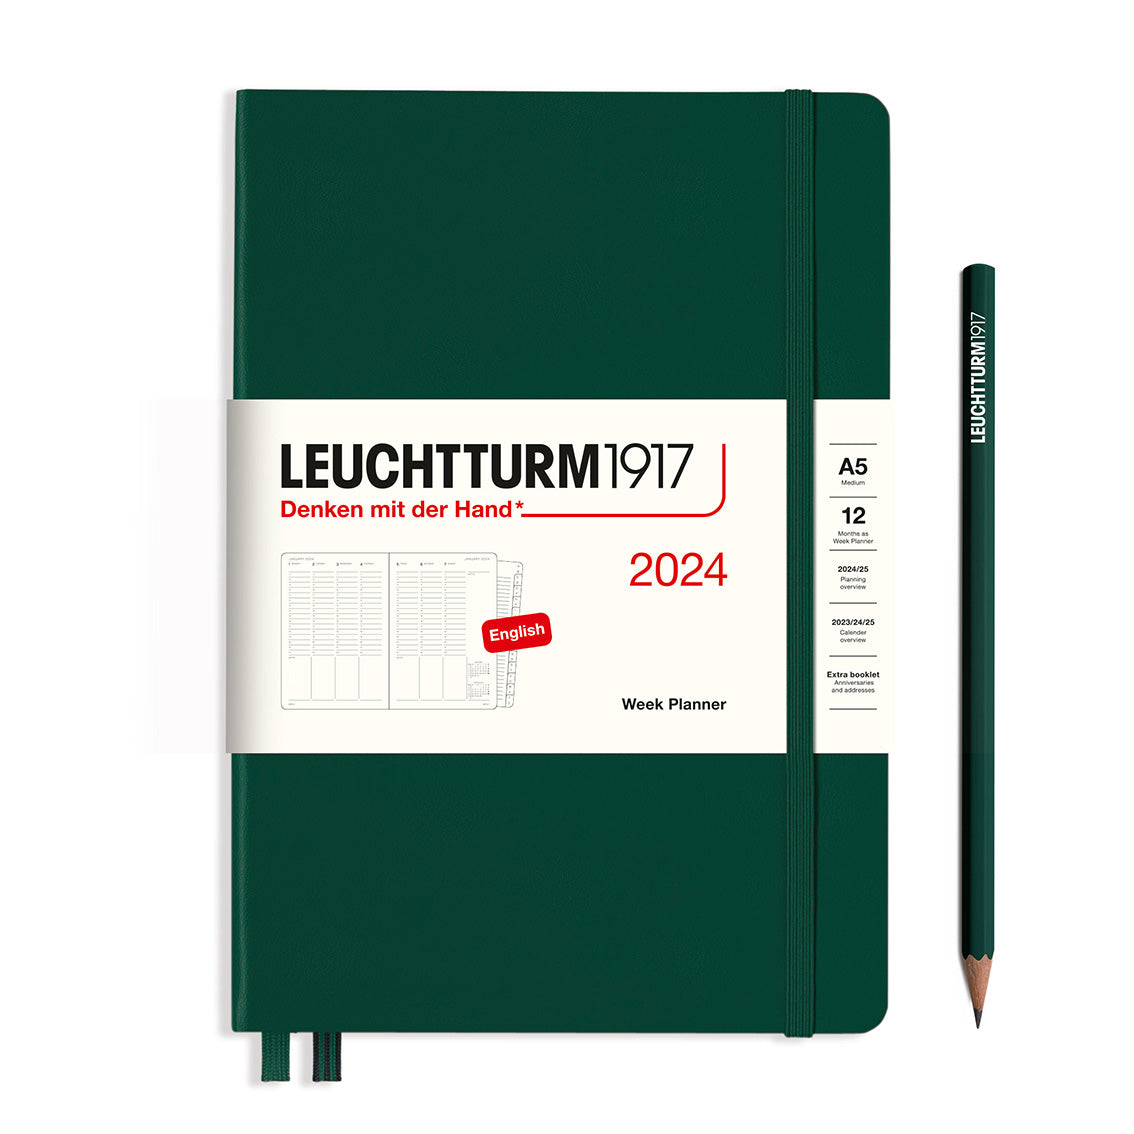 An image of a dark green planner with a dark green elastic band holding it together and a cream paper wrap around the middle stating the business name Leuchtturm1917, that it is for the year 2024, it is a week planner, is A5 in size and an English language version. It has an image on the wrap showing the inside layout which is a week across 2 pages set out as appointments. A dark green pencil is shown at the side of the planner.